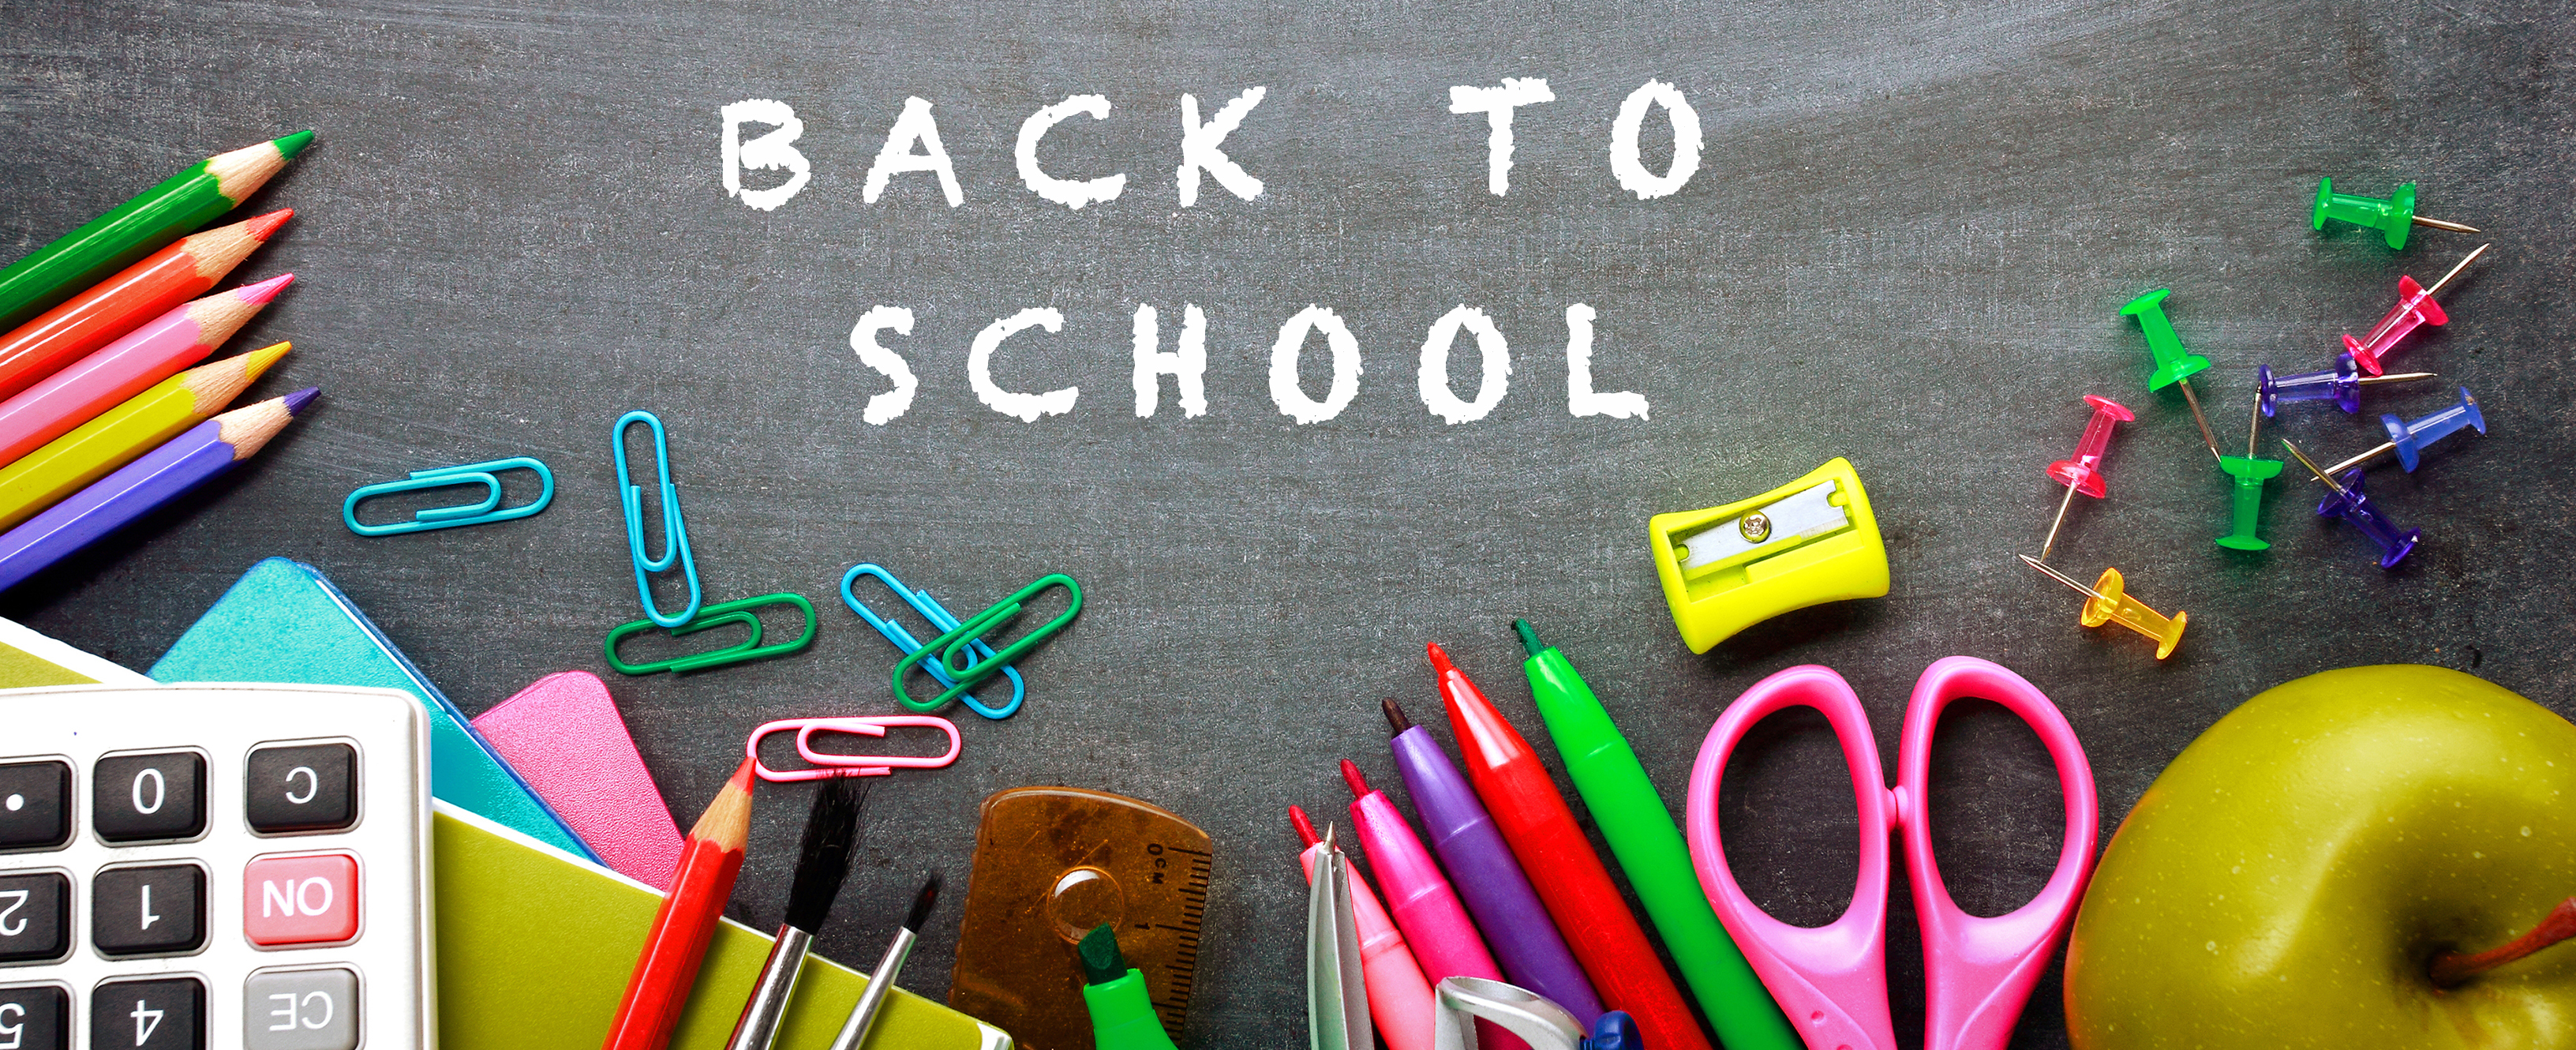 BACK TO SCHOOL…DRUM ROLL PLEASE!